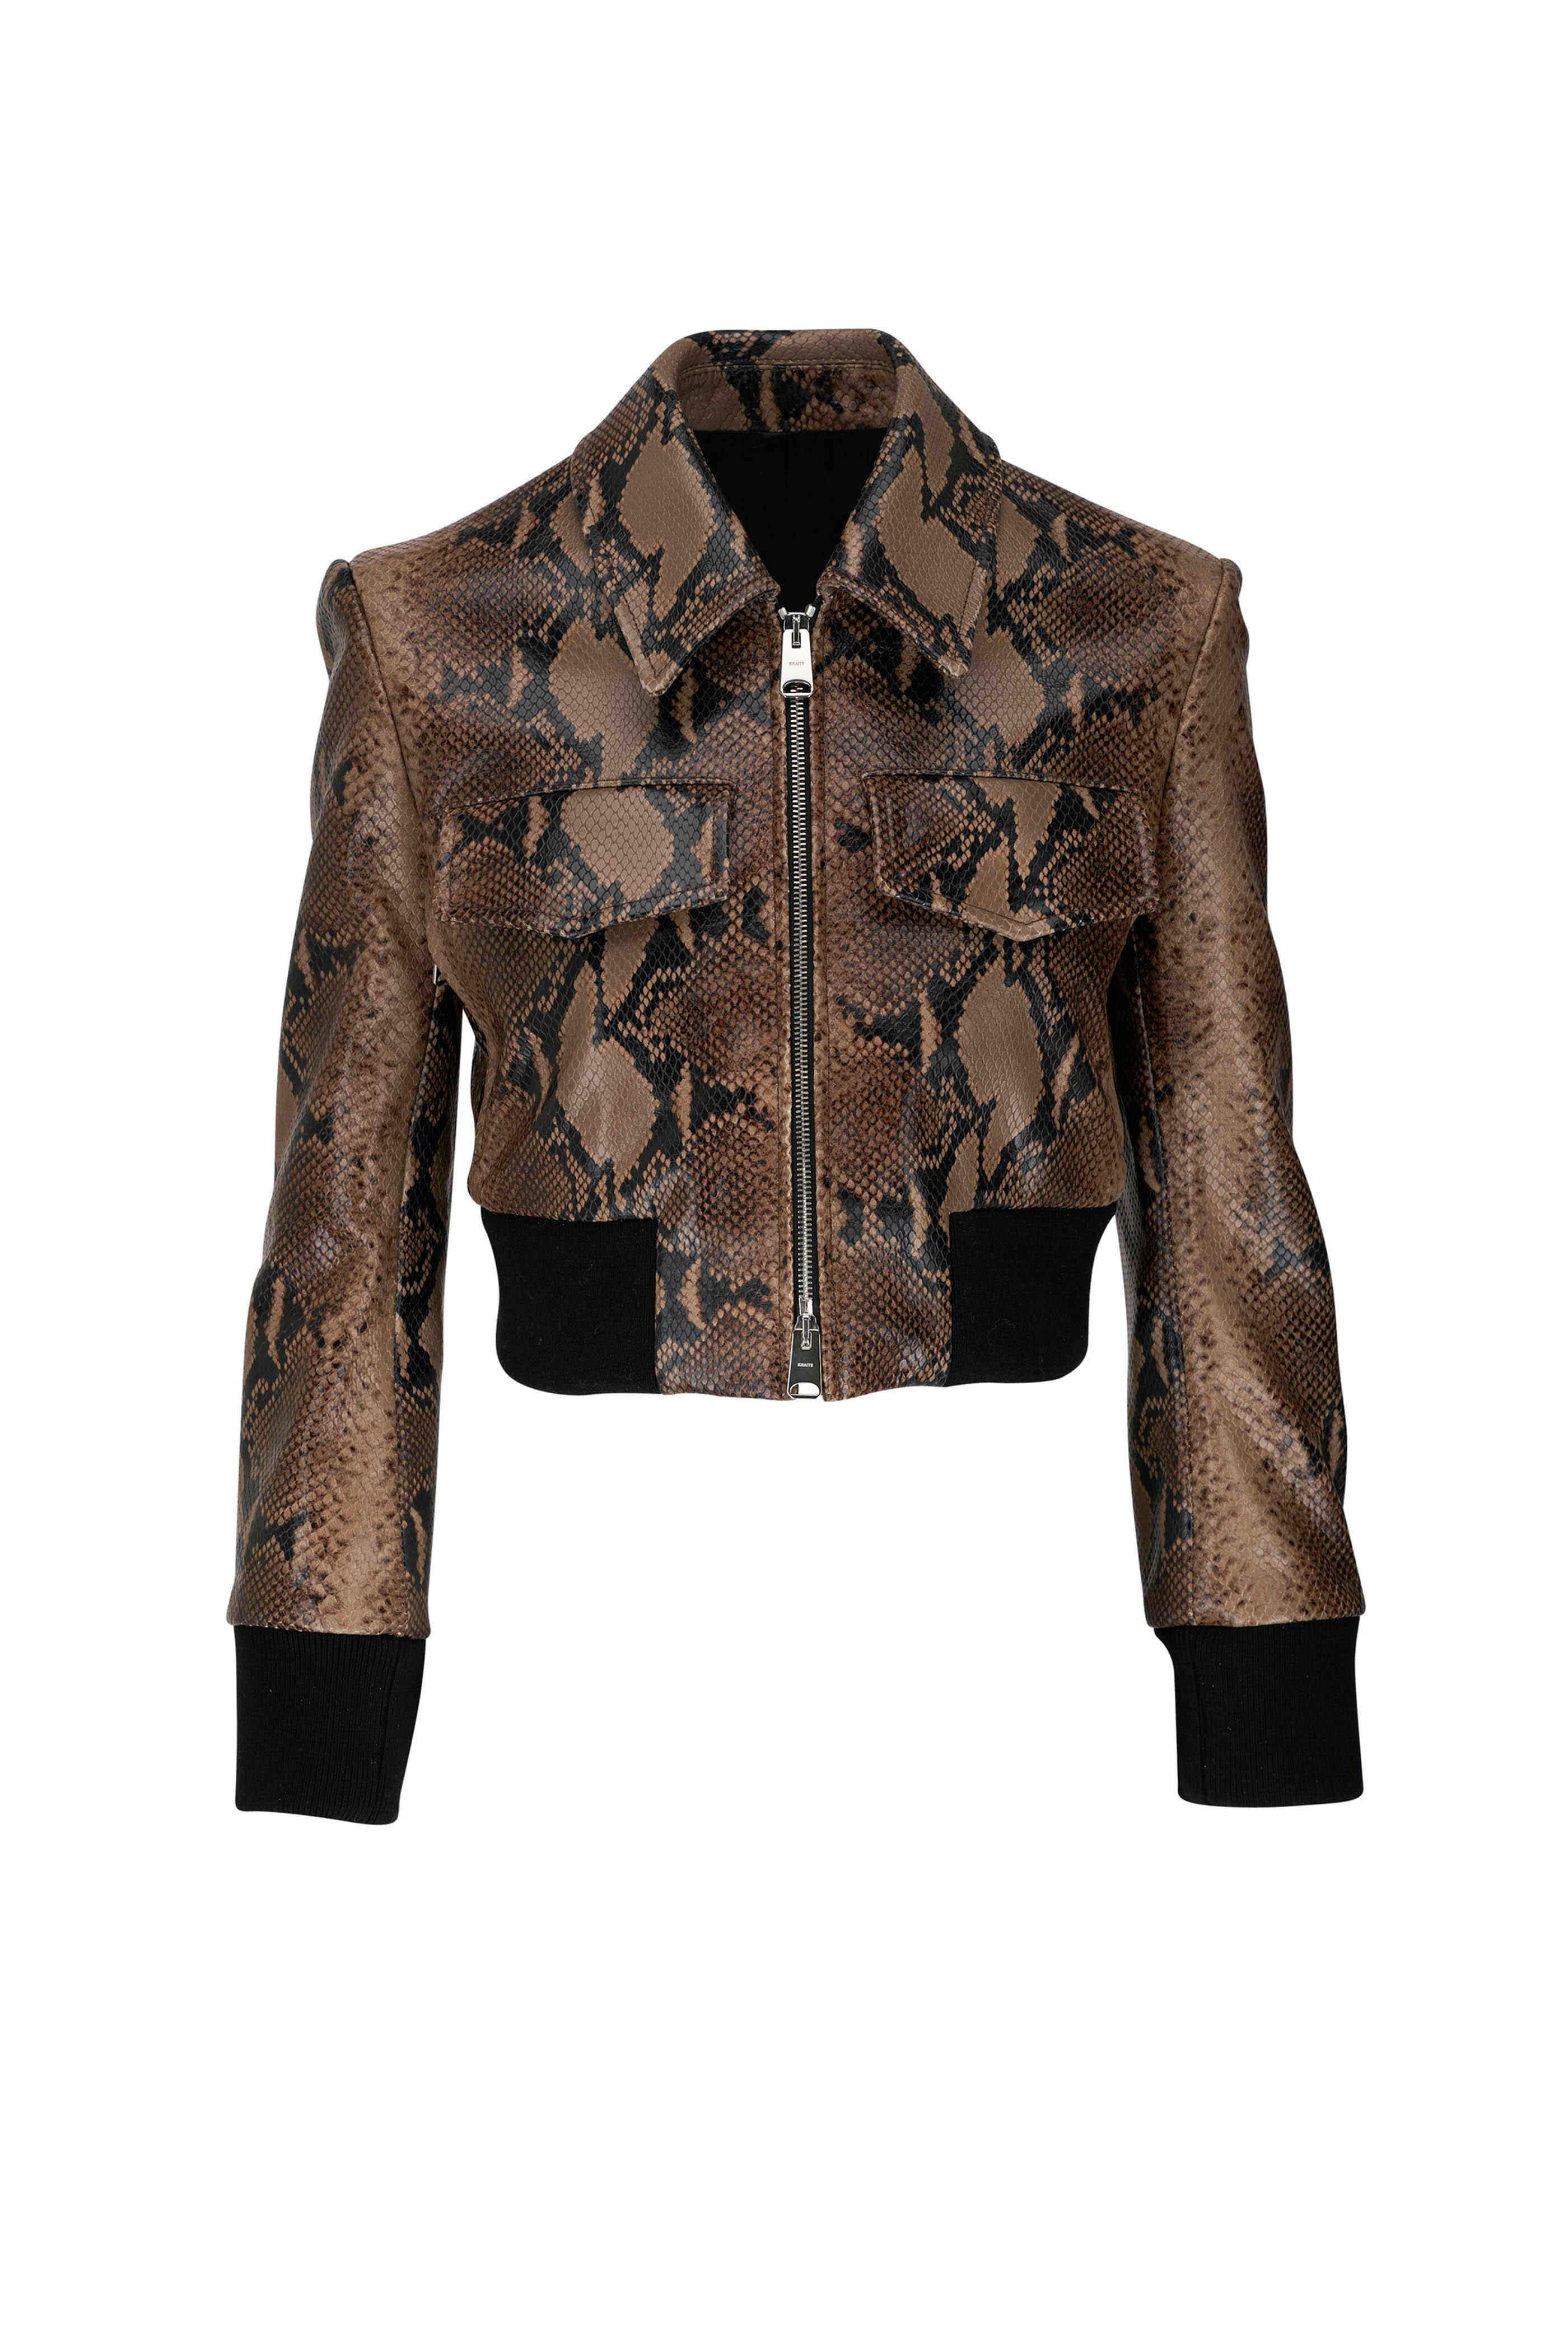 KHAITE The Hector Jacket in Brown Python-Embossed Leather - ShopStyle